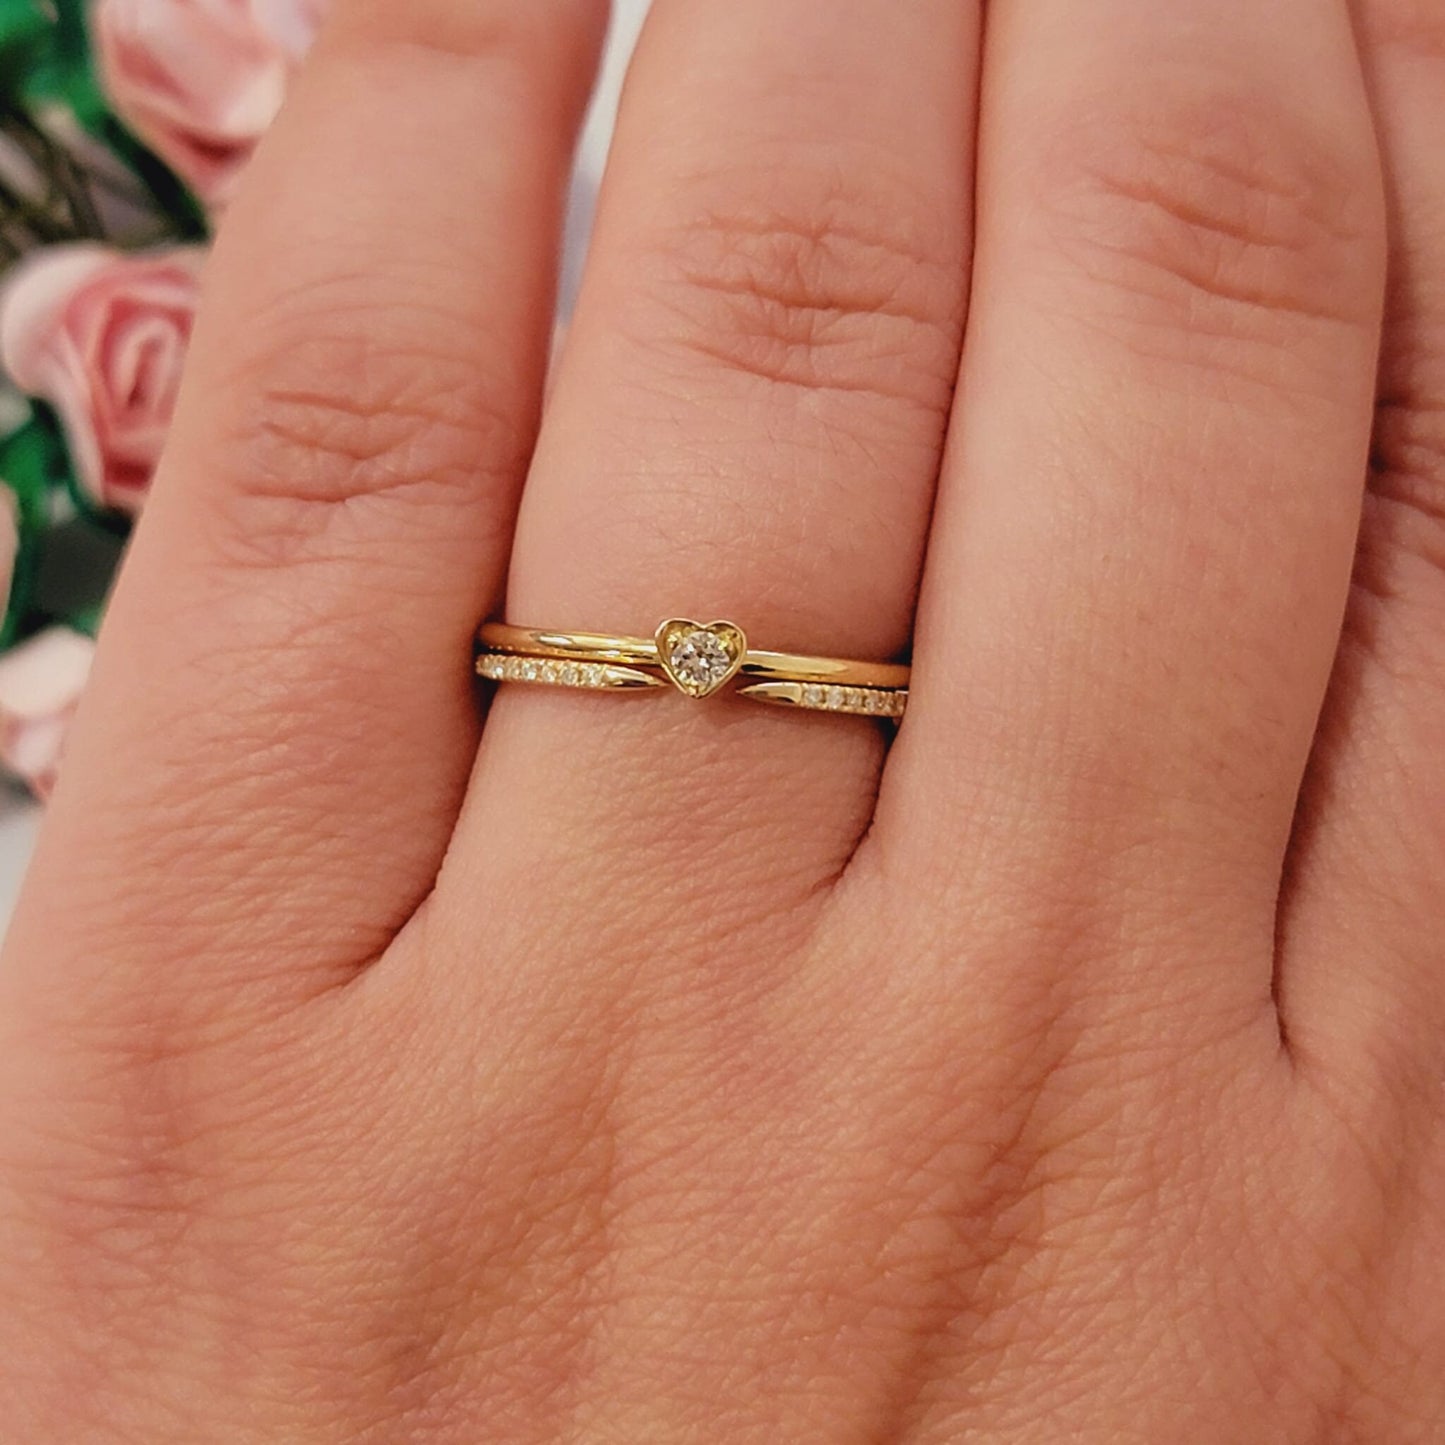 Heart-Shape Diamond Ring, Tiny Diamond Ring Women, Solid Gold Band, Promise Ring,  14k Gold Stackable Ring, White Gold Ring, Minimalist ring